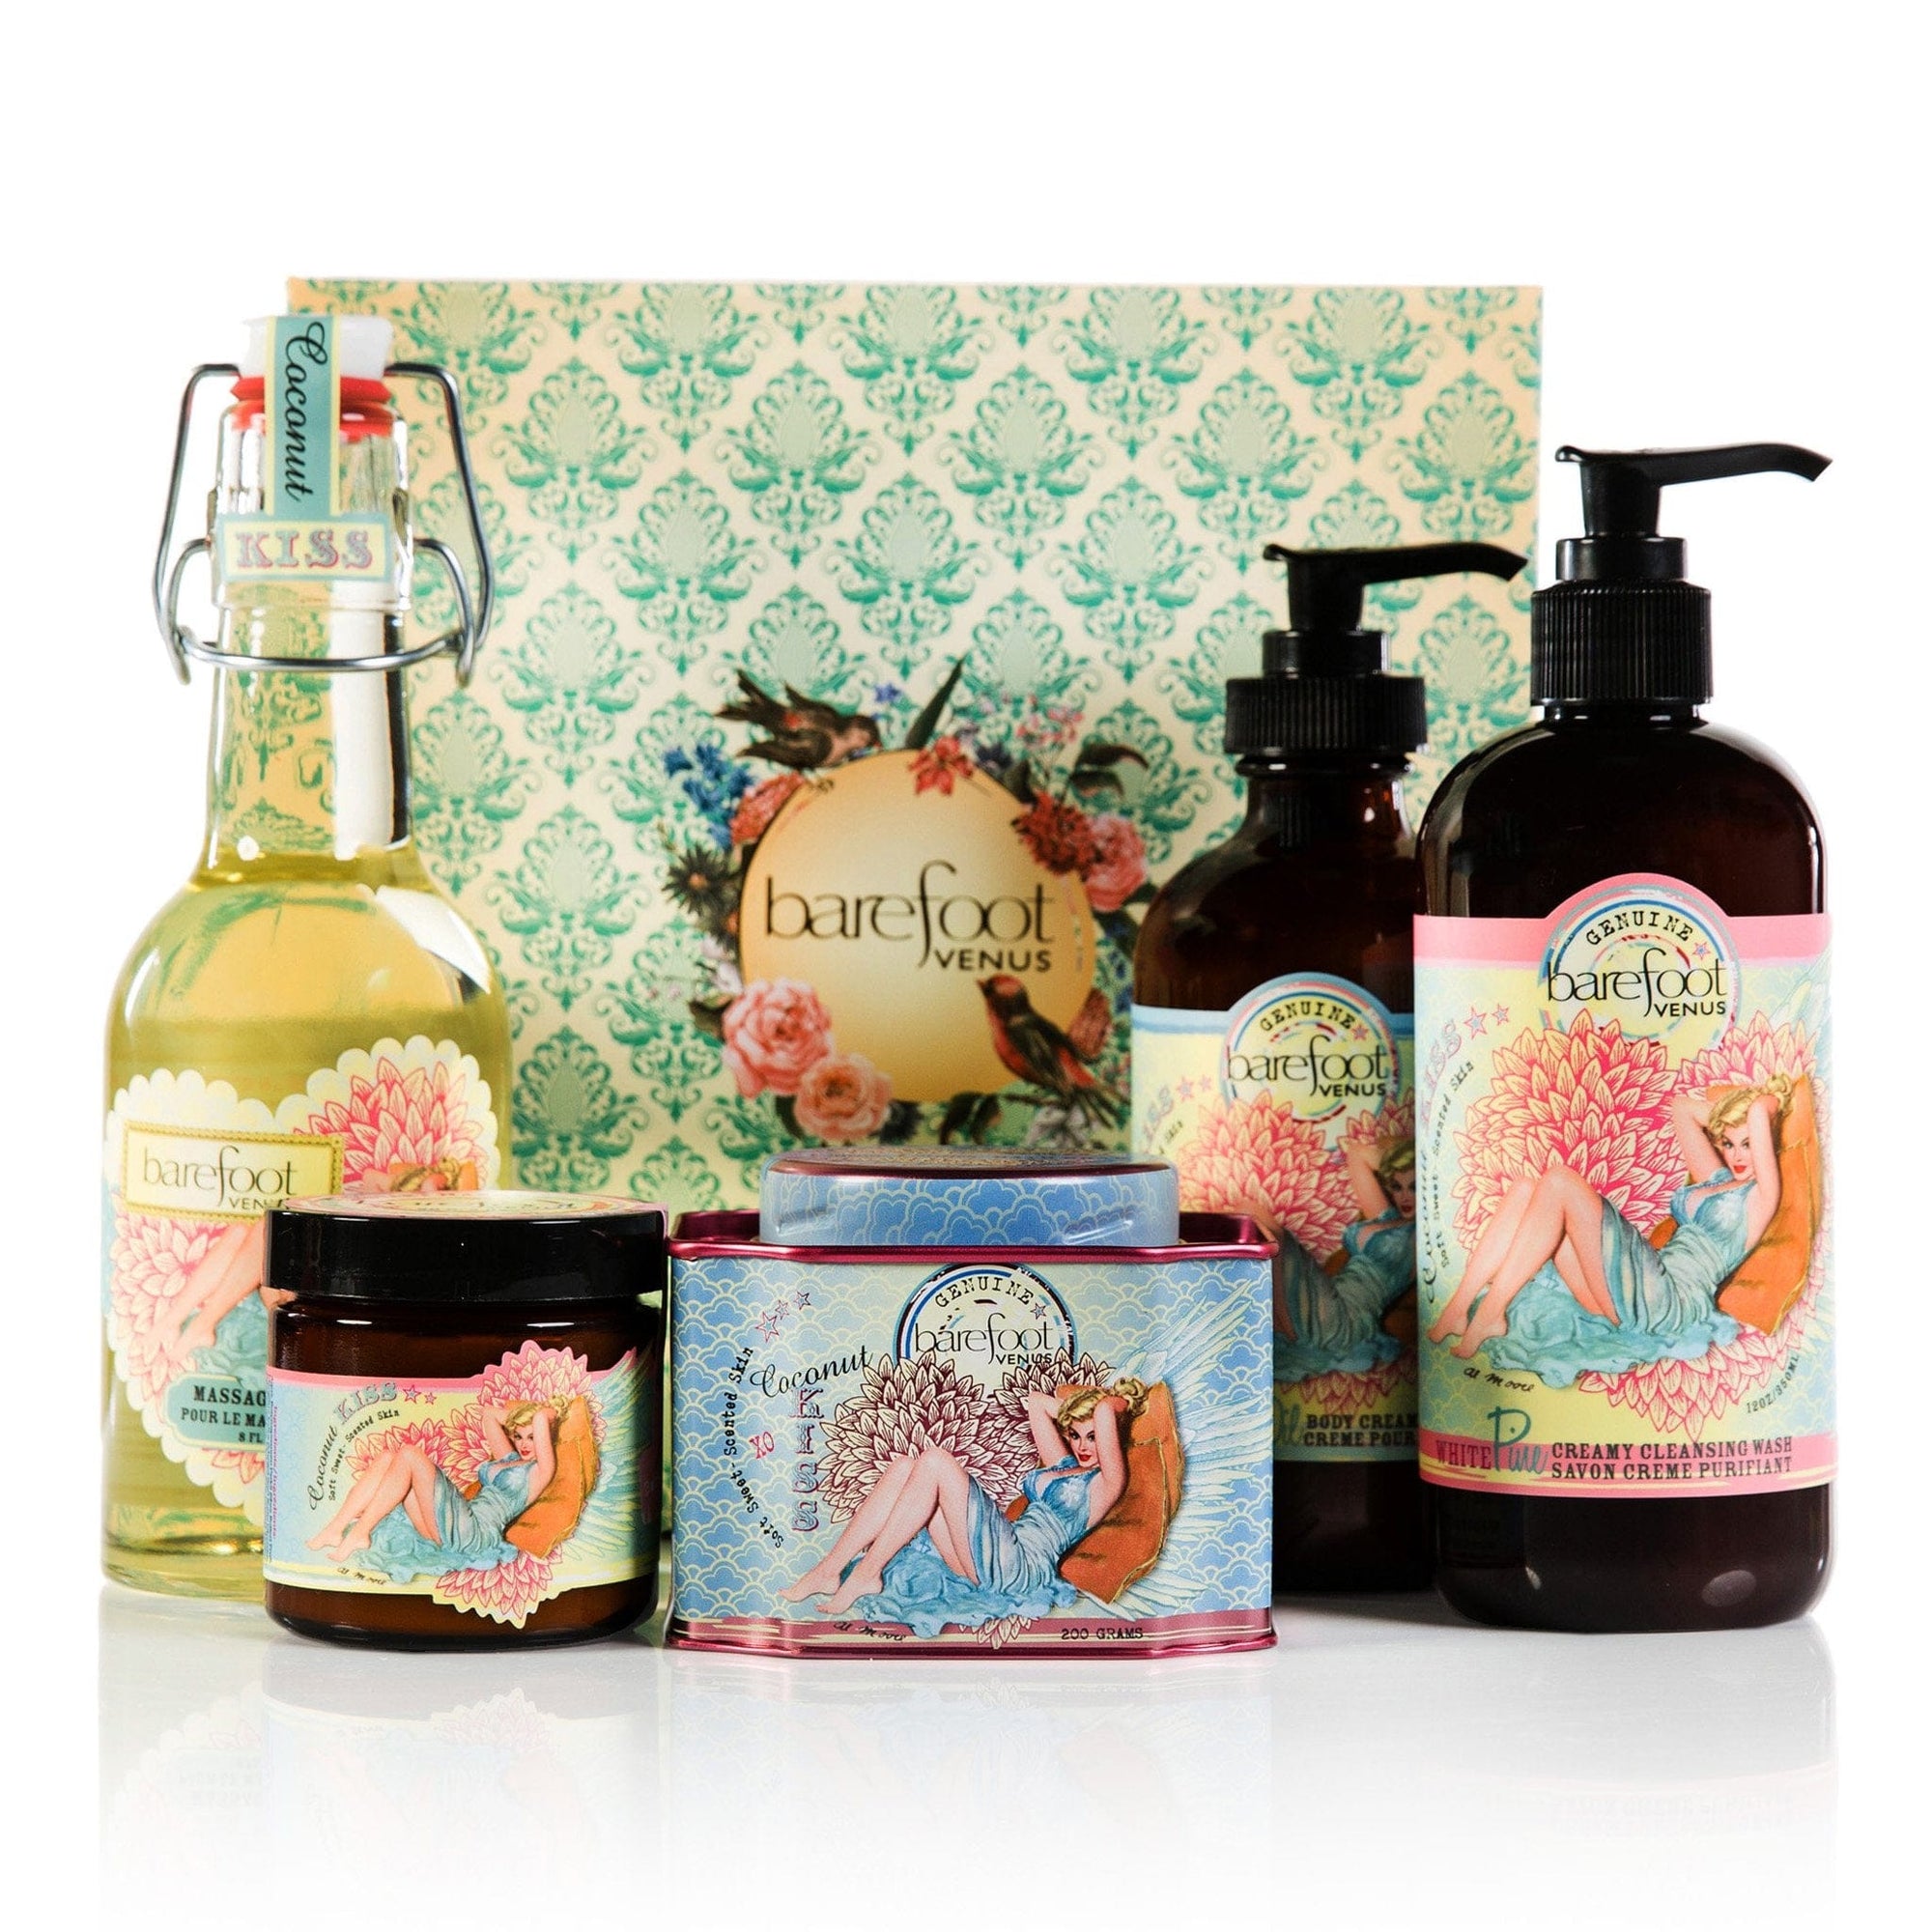 Coconut Kiss Gift Set MOST GIFTED. TROPICAL BLISS. Barefoot Venus